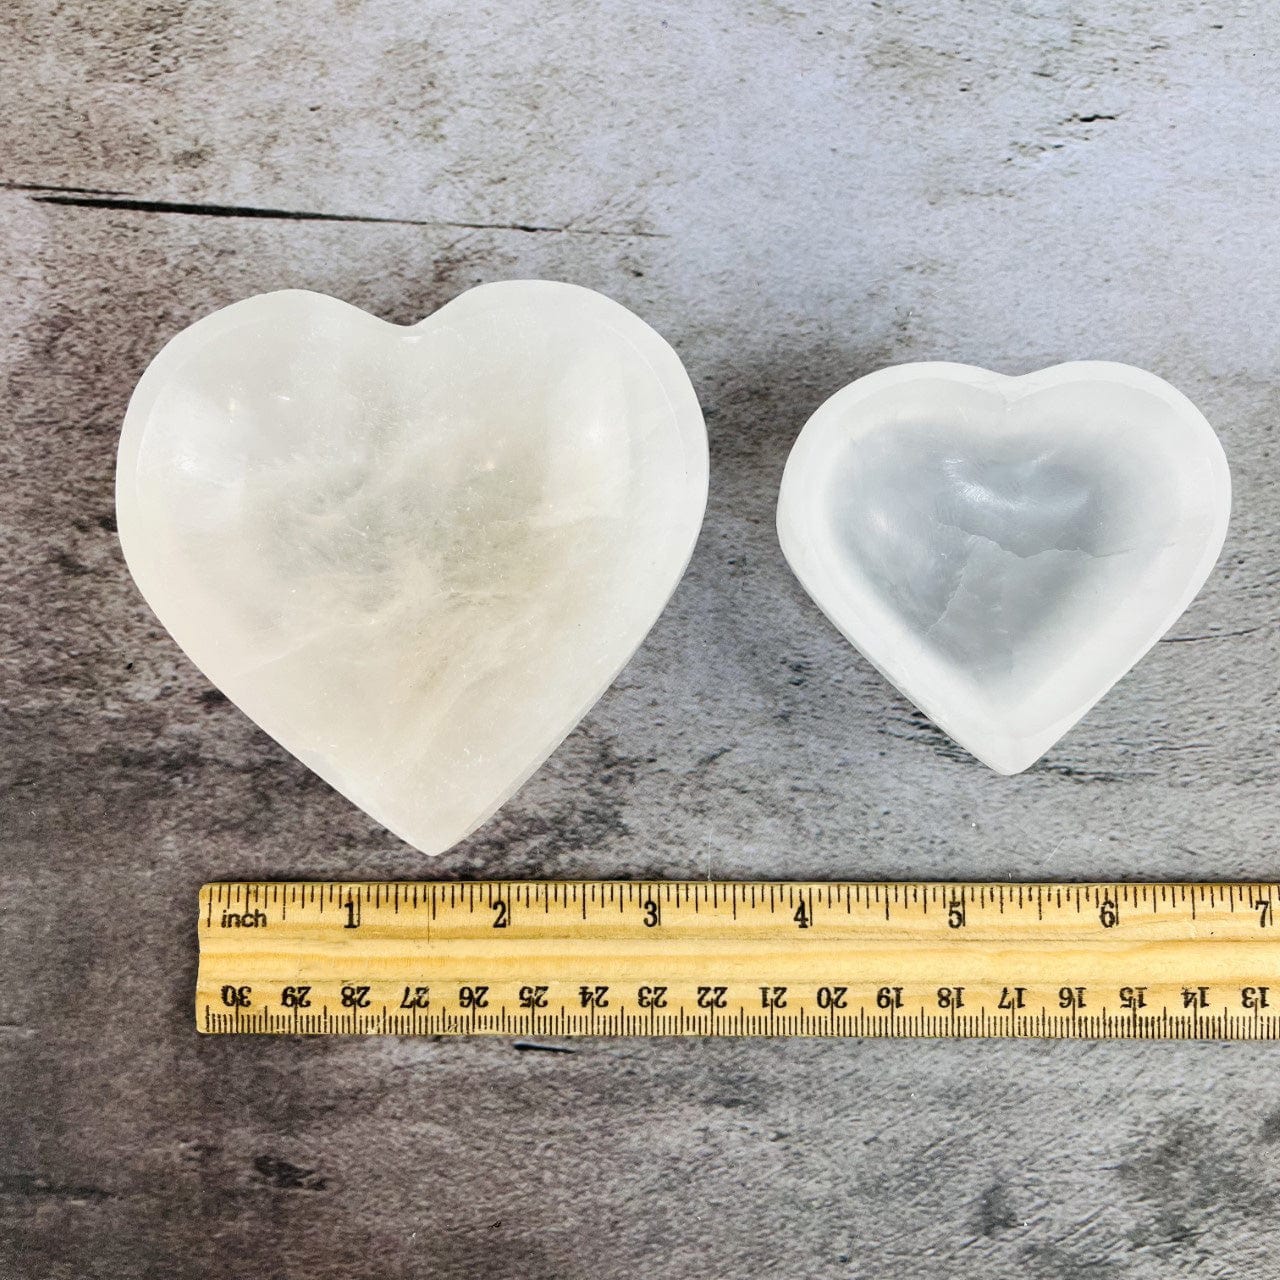 2 sizes of Selenite Heart Bowls next to a ruler for sizing